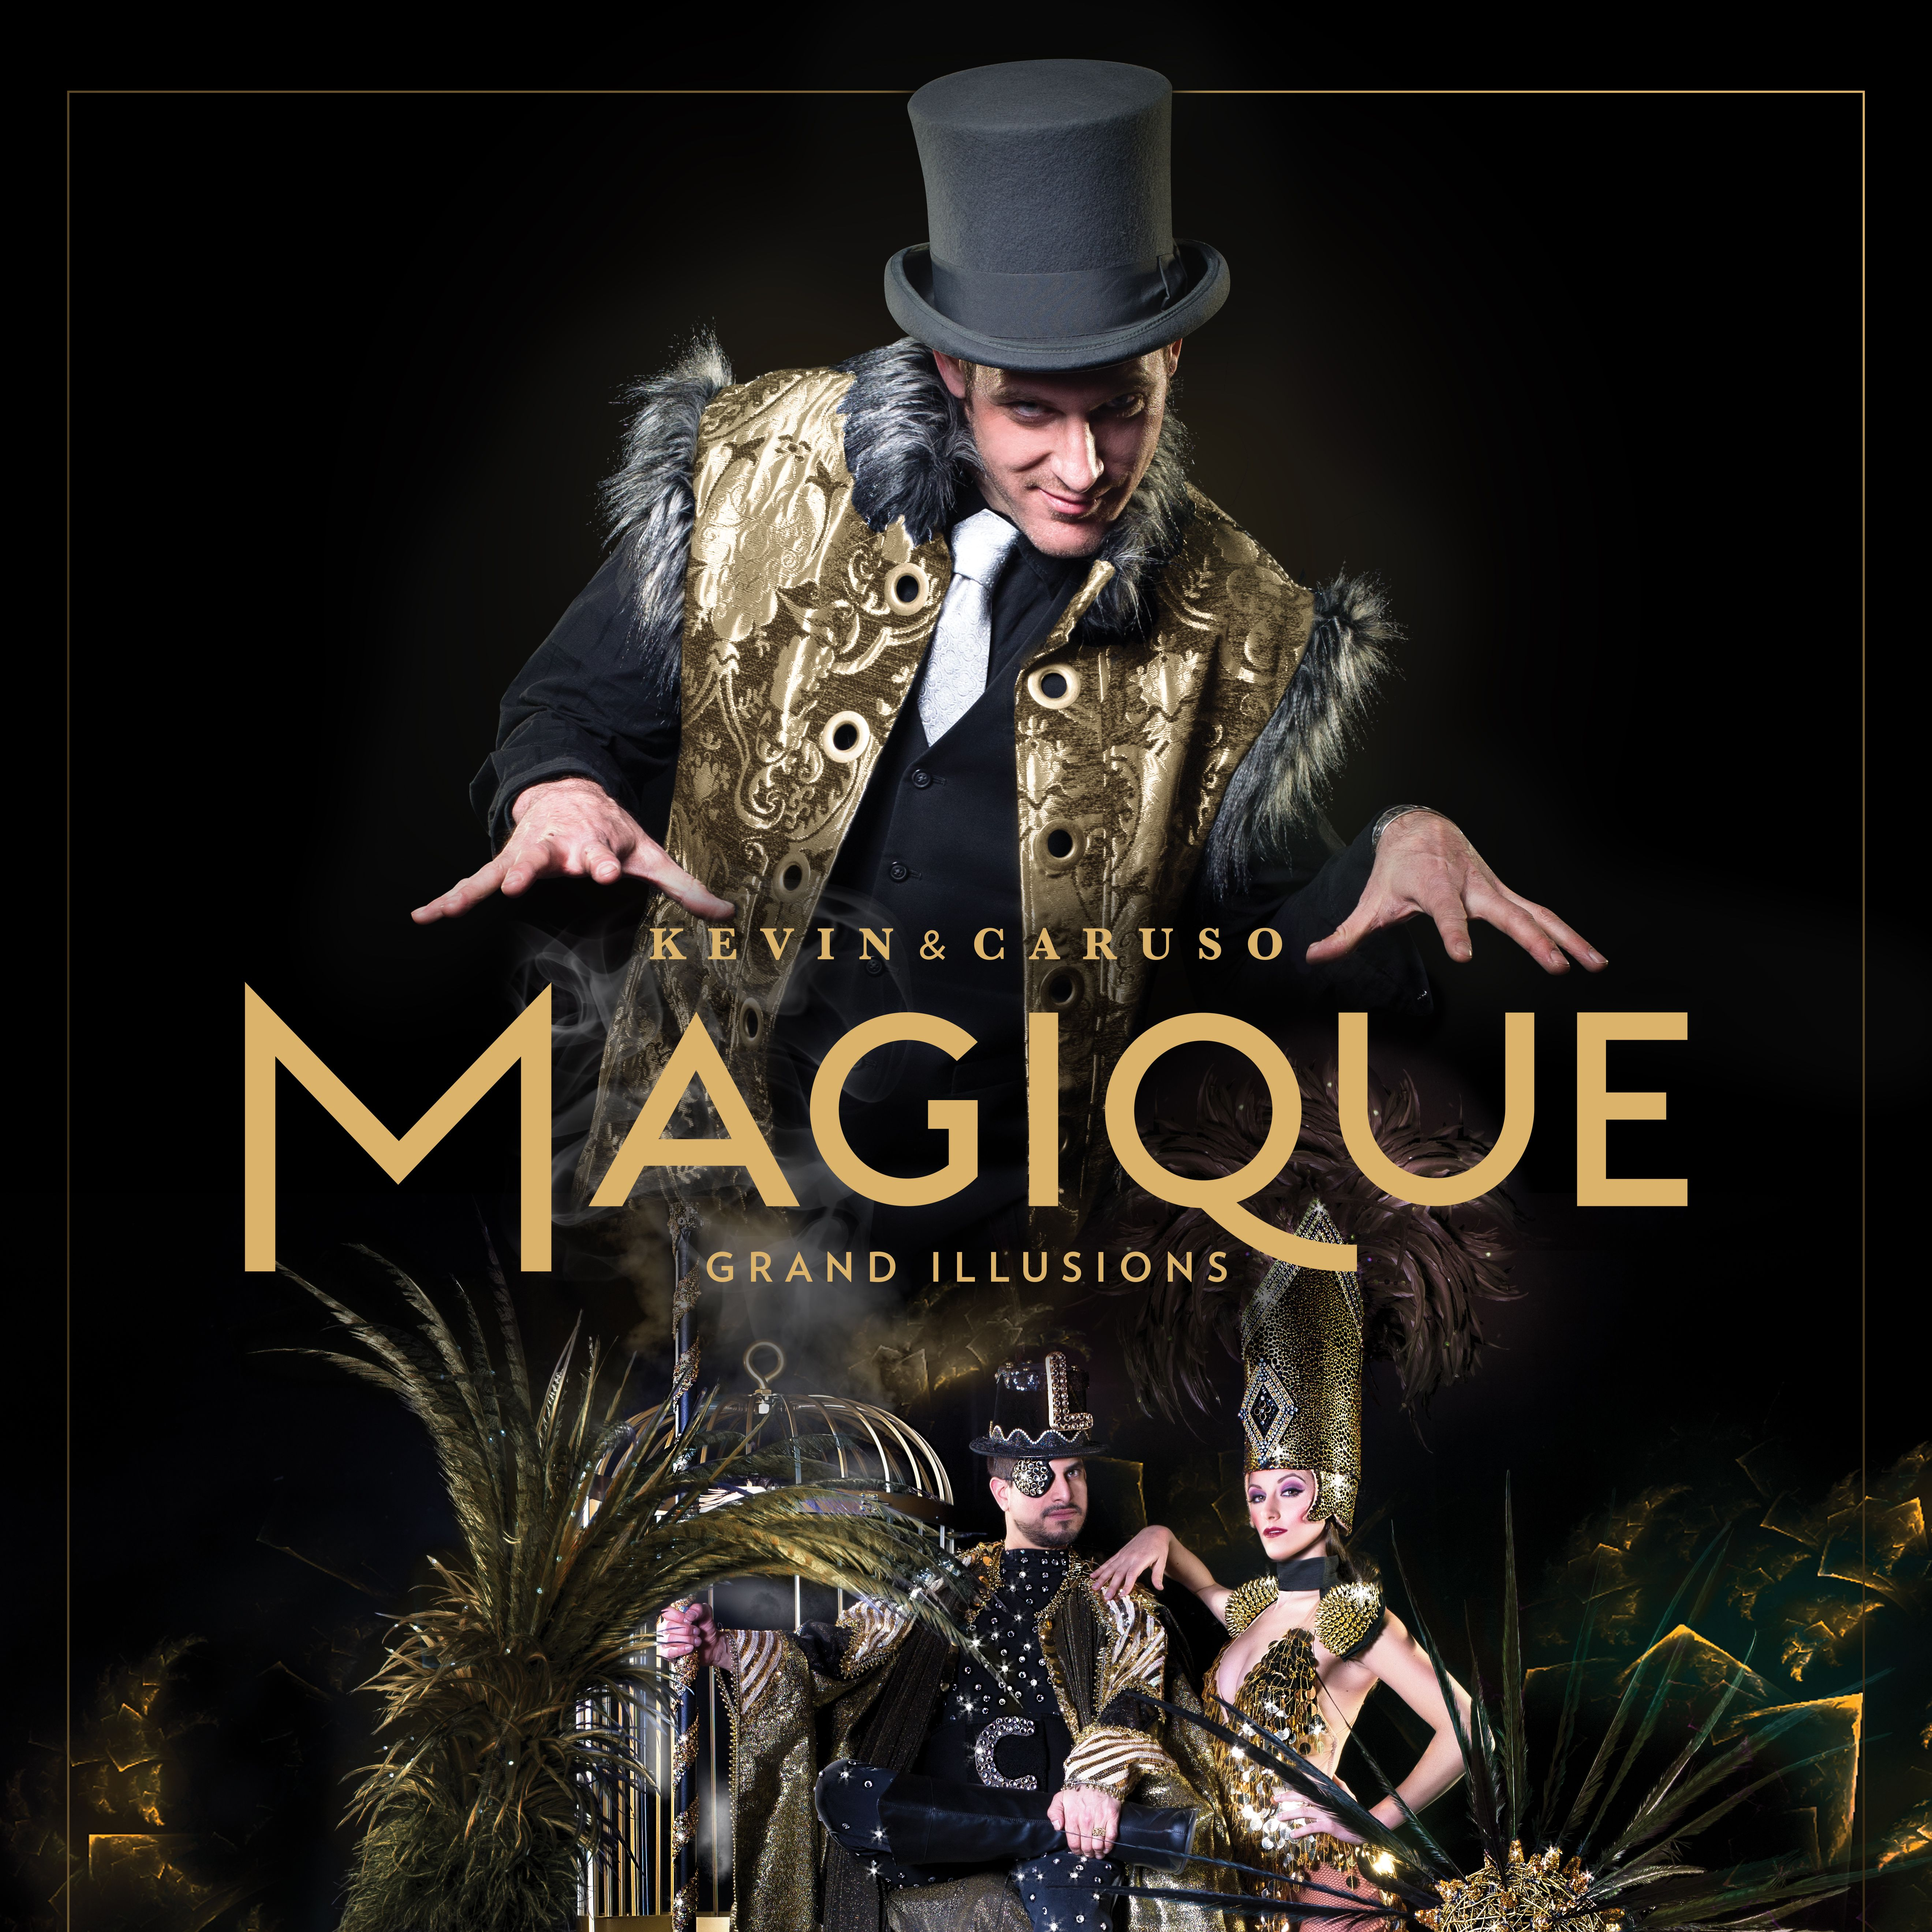 Kevin & Caruso - Magique - Special Guest Madame Houdini Hotel Packages - Niagara Falls Valentine's Day